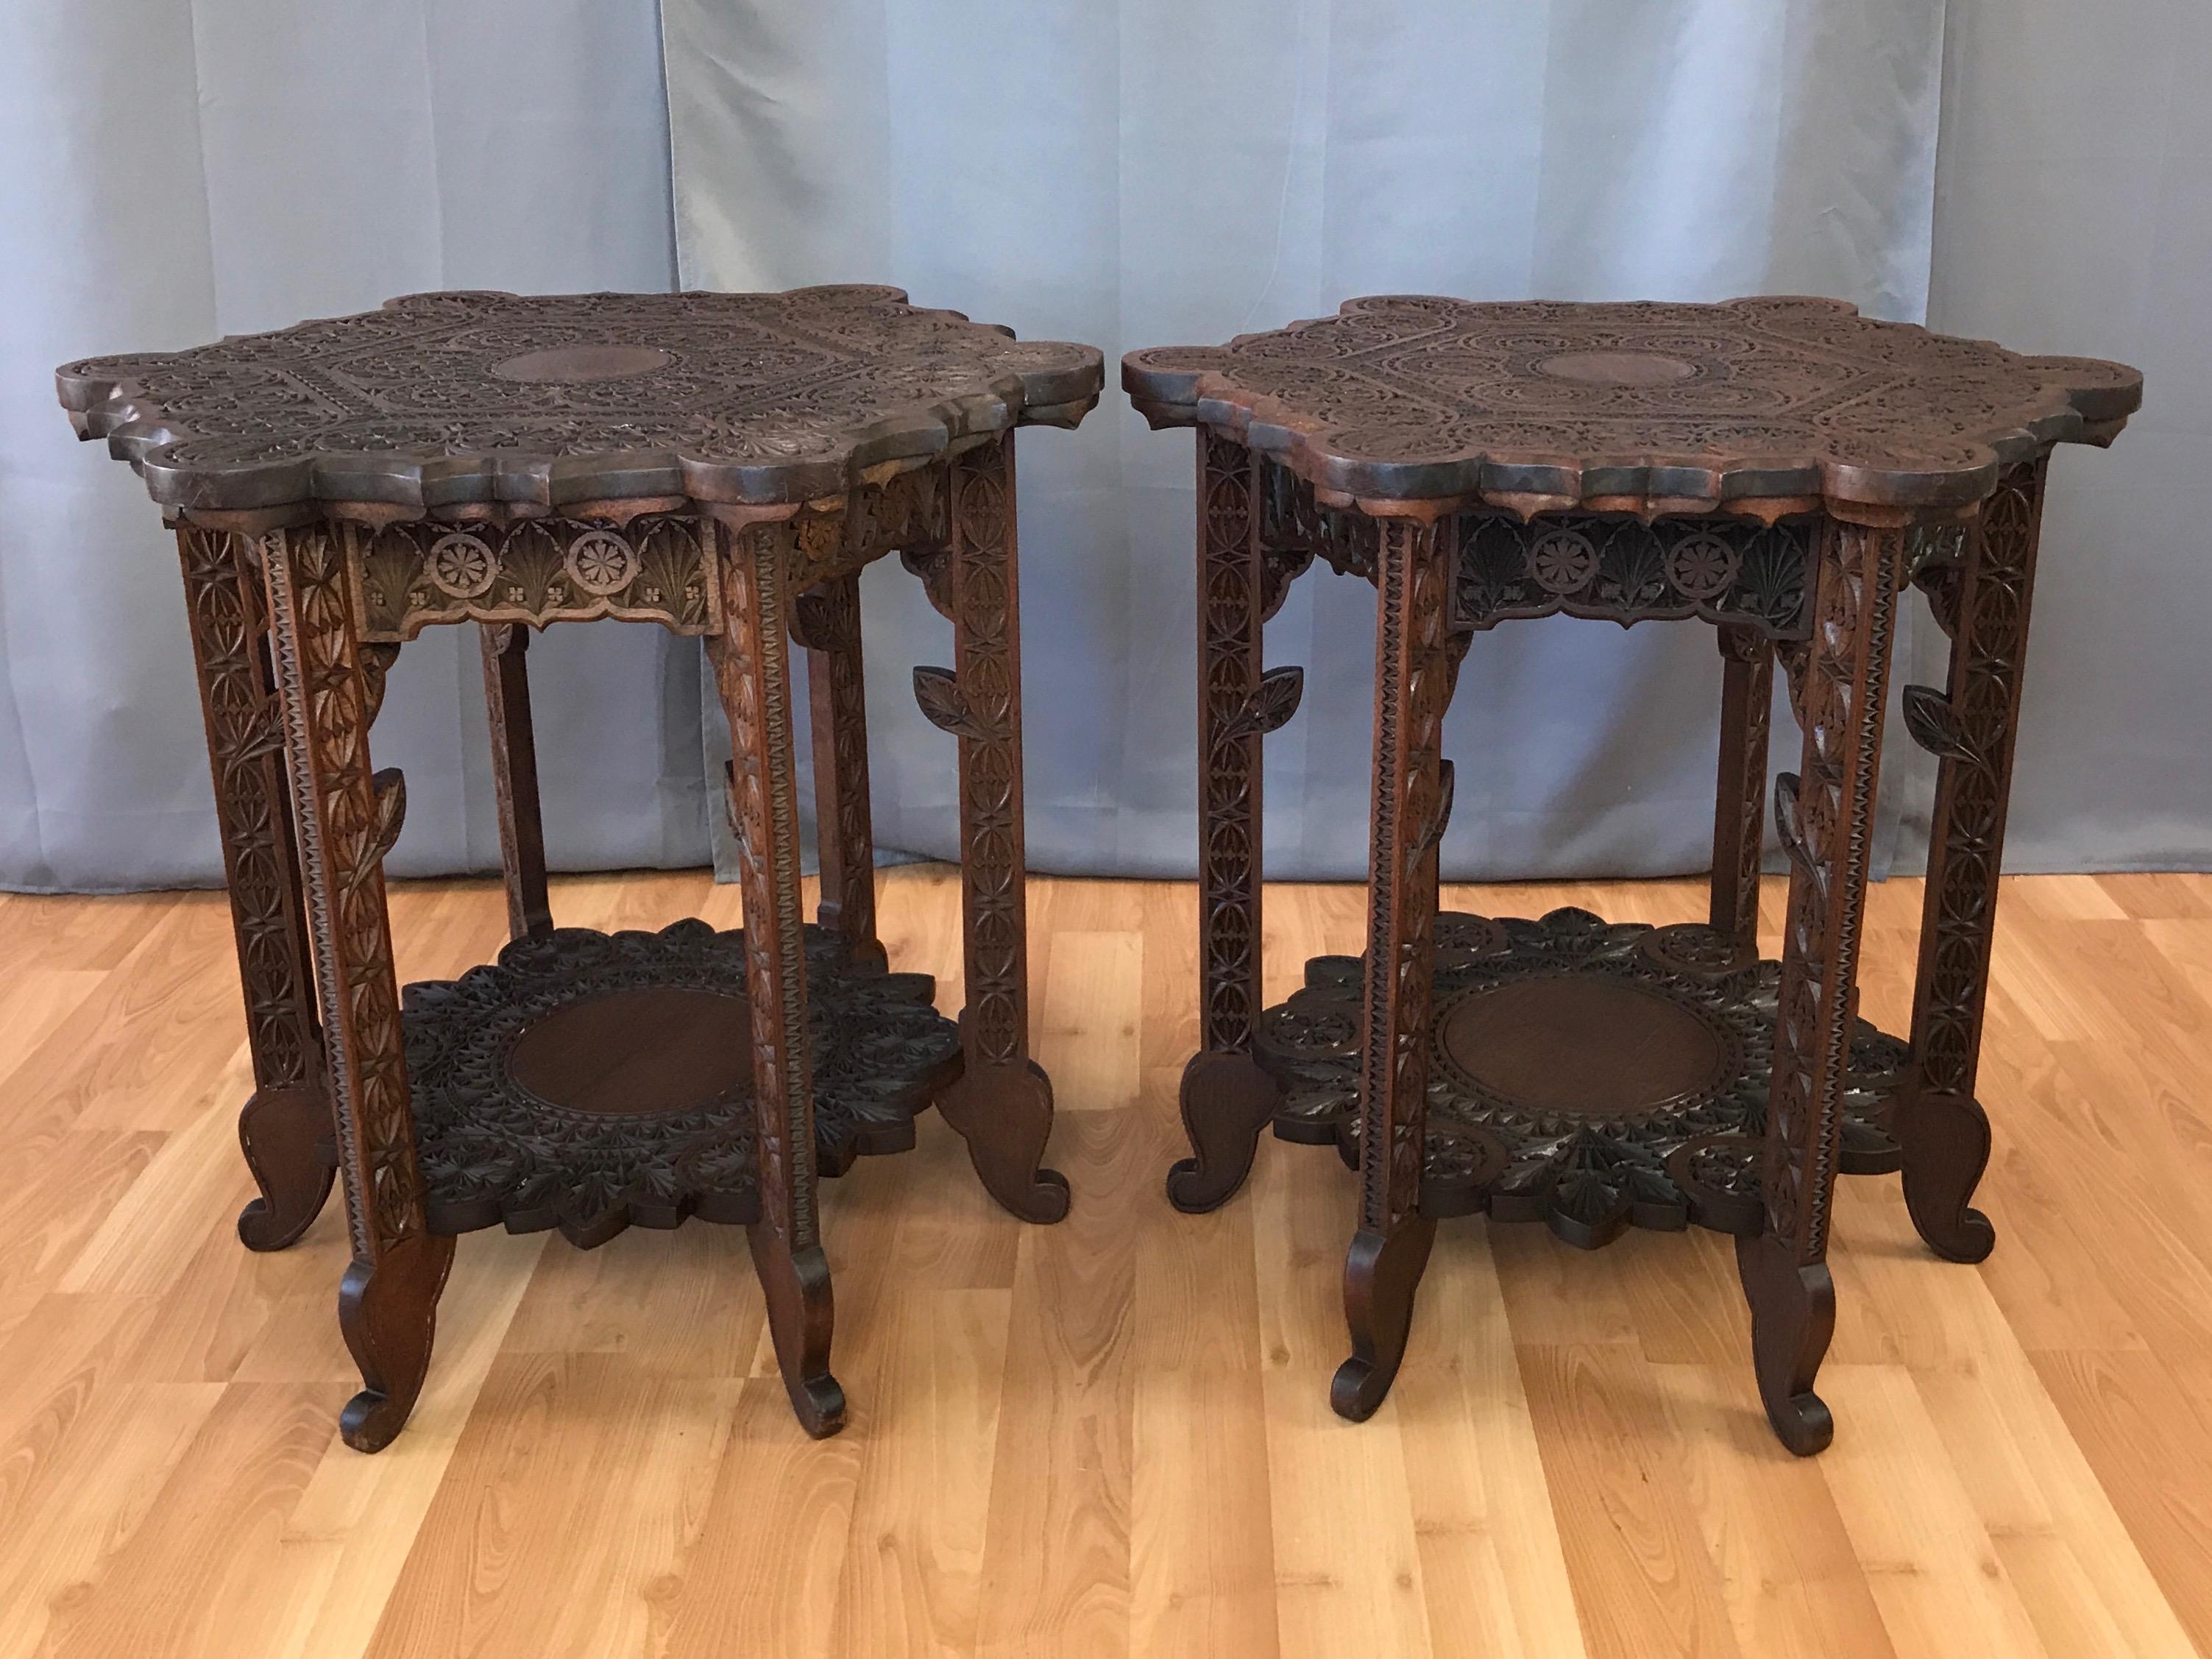 An exceptional pair of early 1900s Anglo-Indian hand carved rosewood two-tier side or end tables.

Astonishing level of meticulously executed craftsmanship decorates every inch, with delightful details on display from every angle. Hexagonal top with